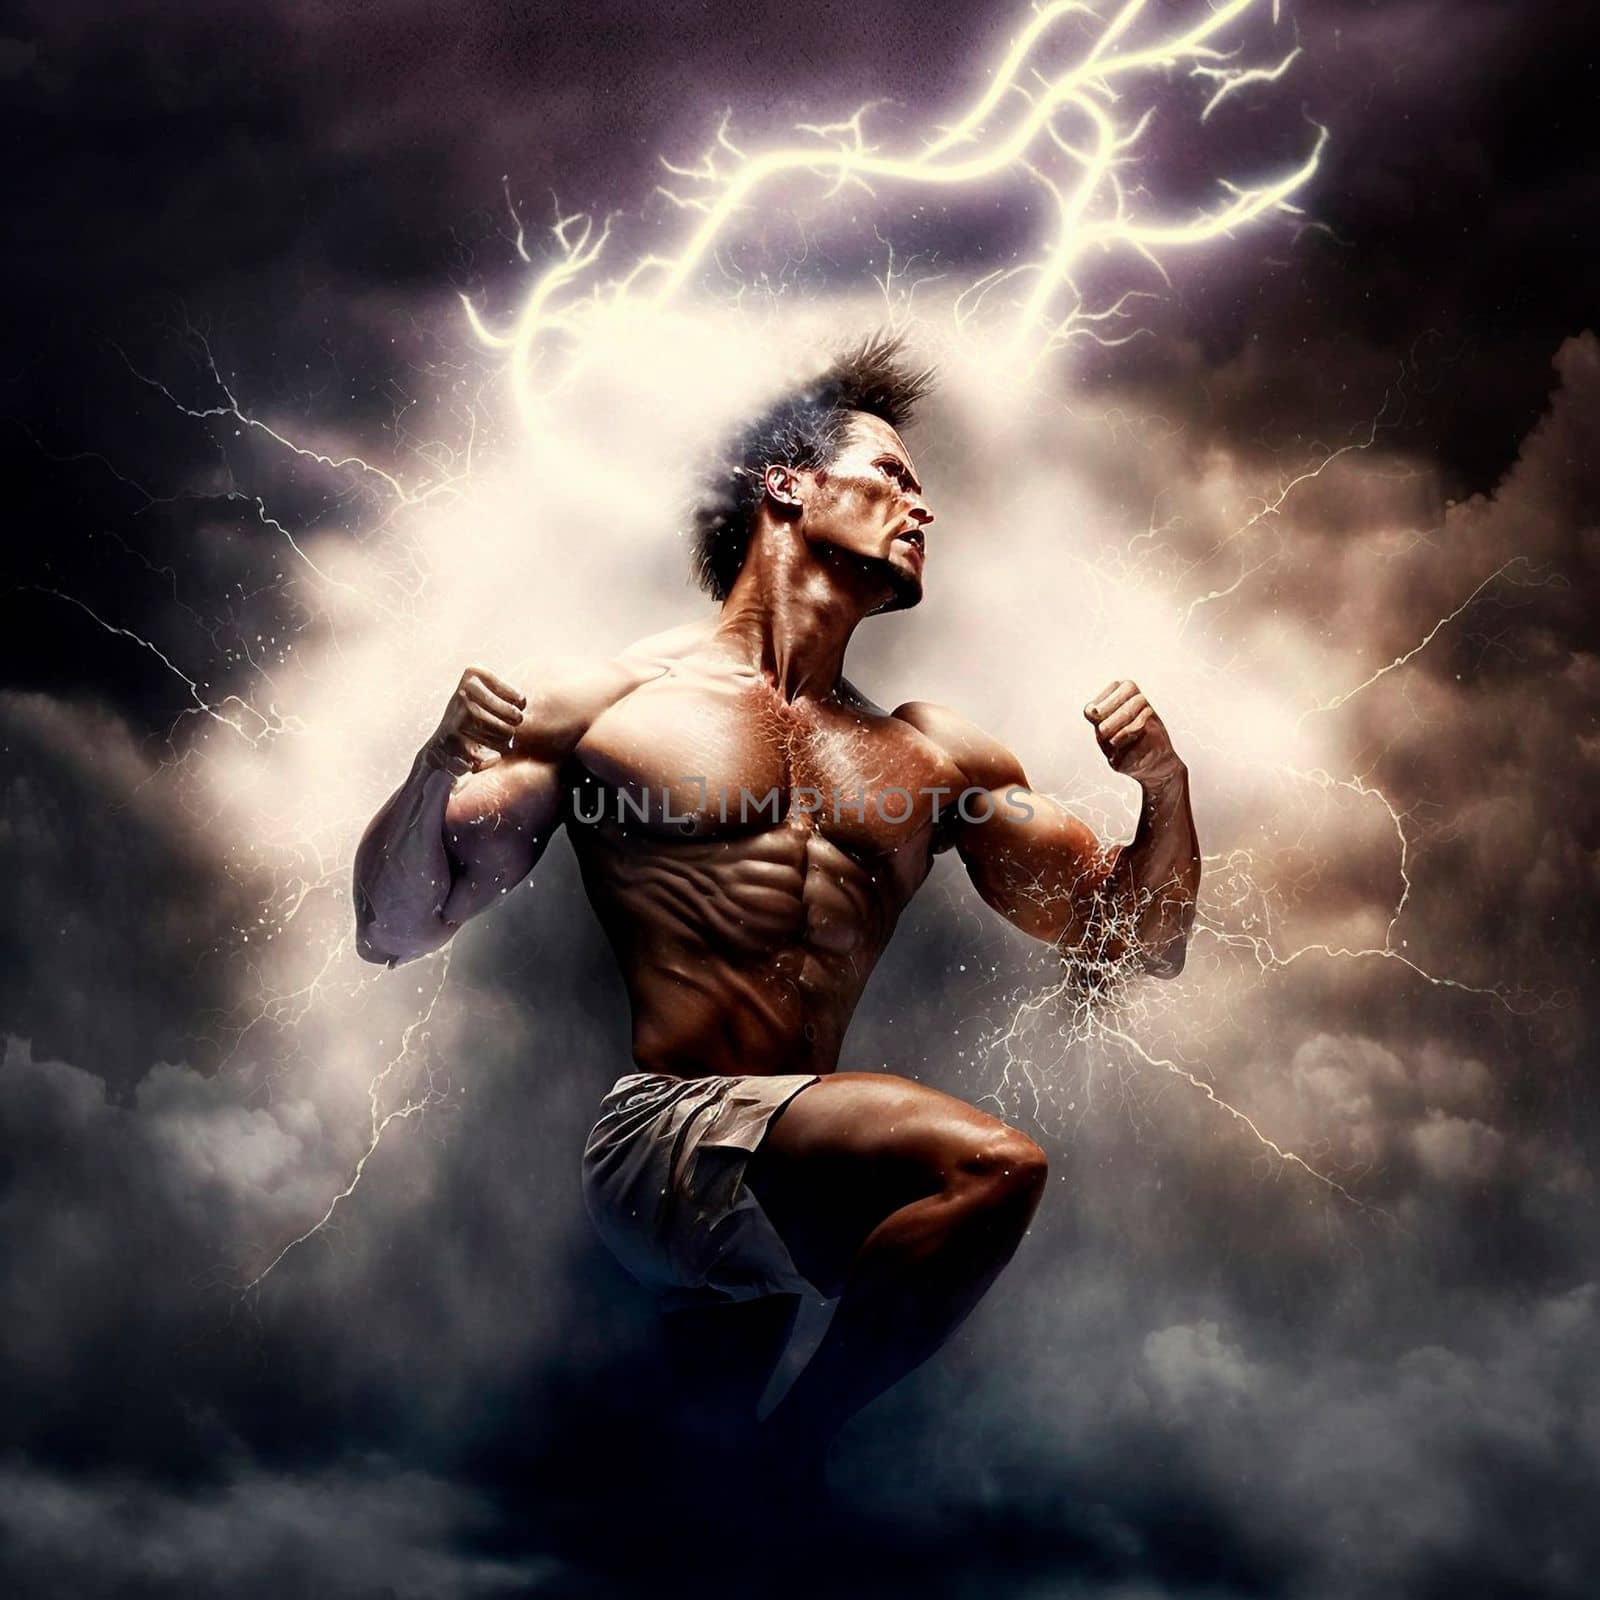 muscular man gaining strength and himself. High quality Illustration